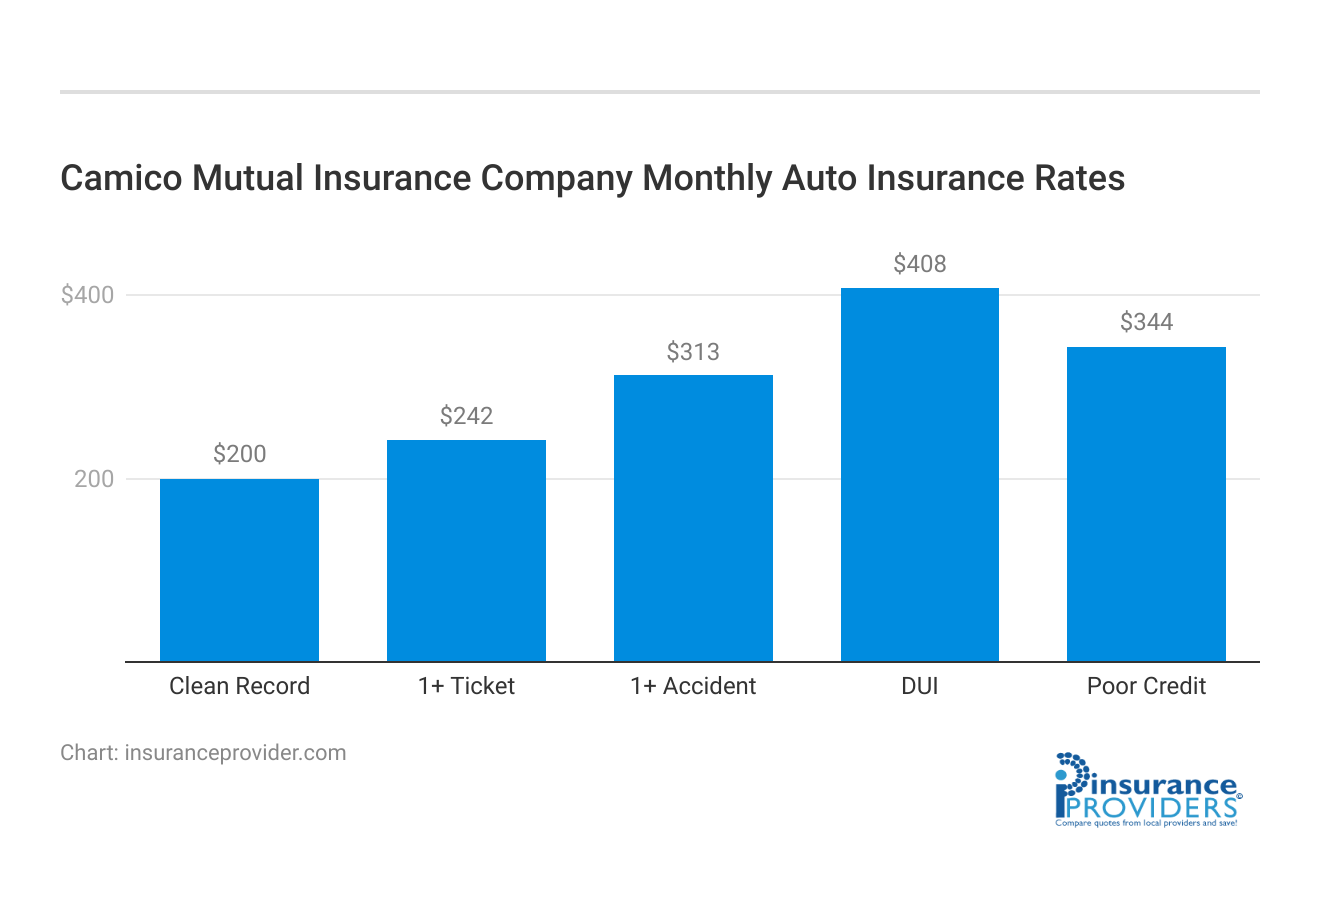 Camico Mutual Insurance Company Monthly Auto Insurance Rates